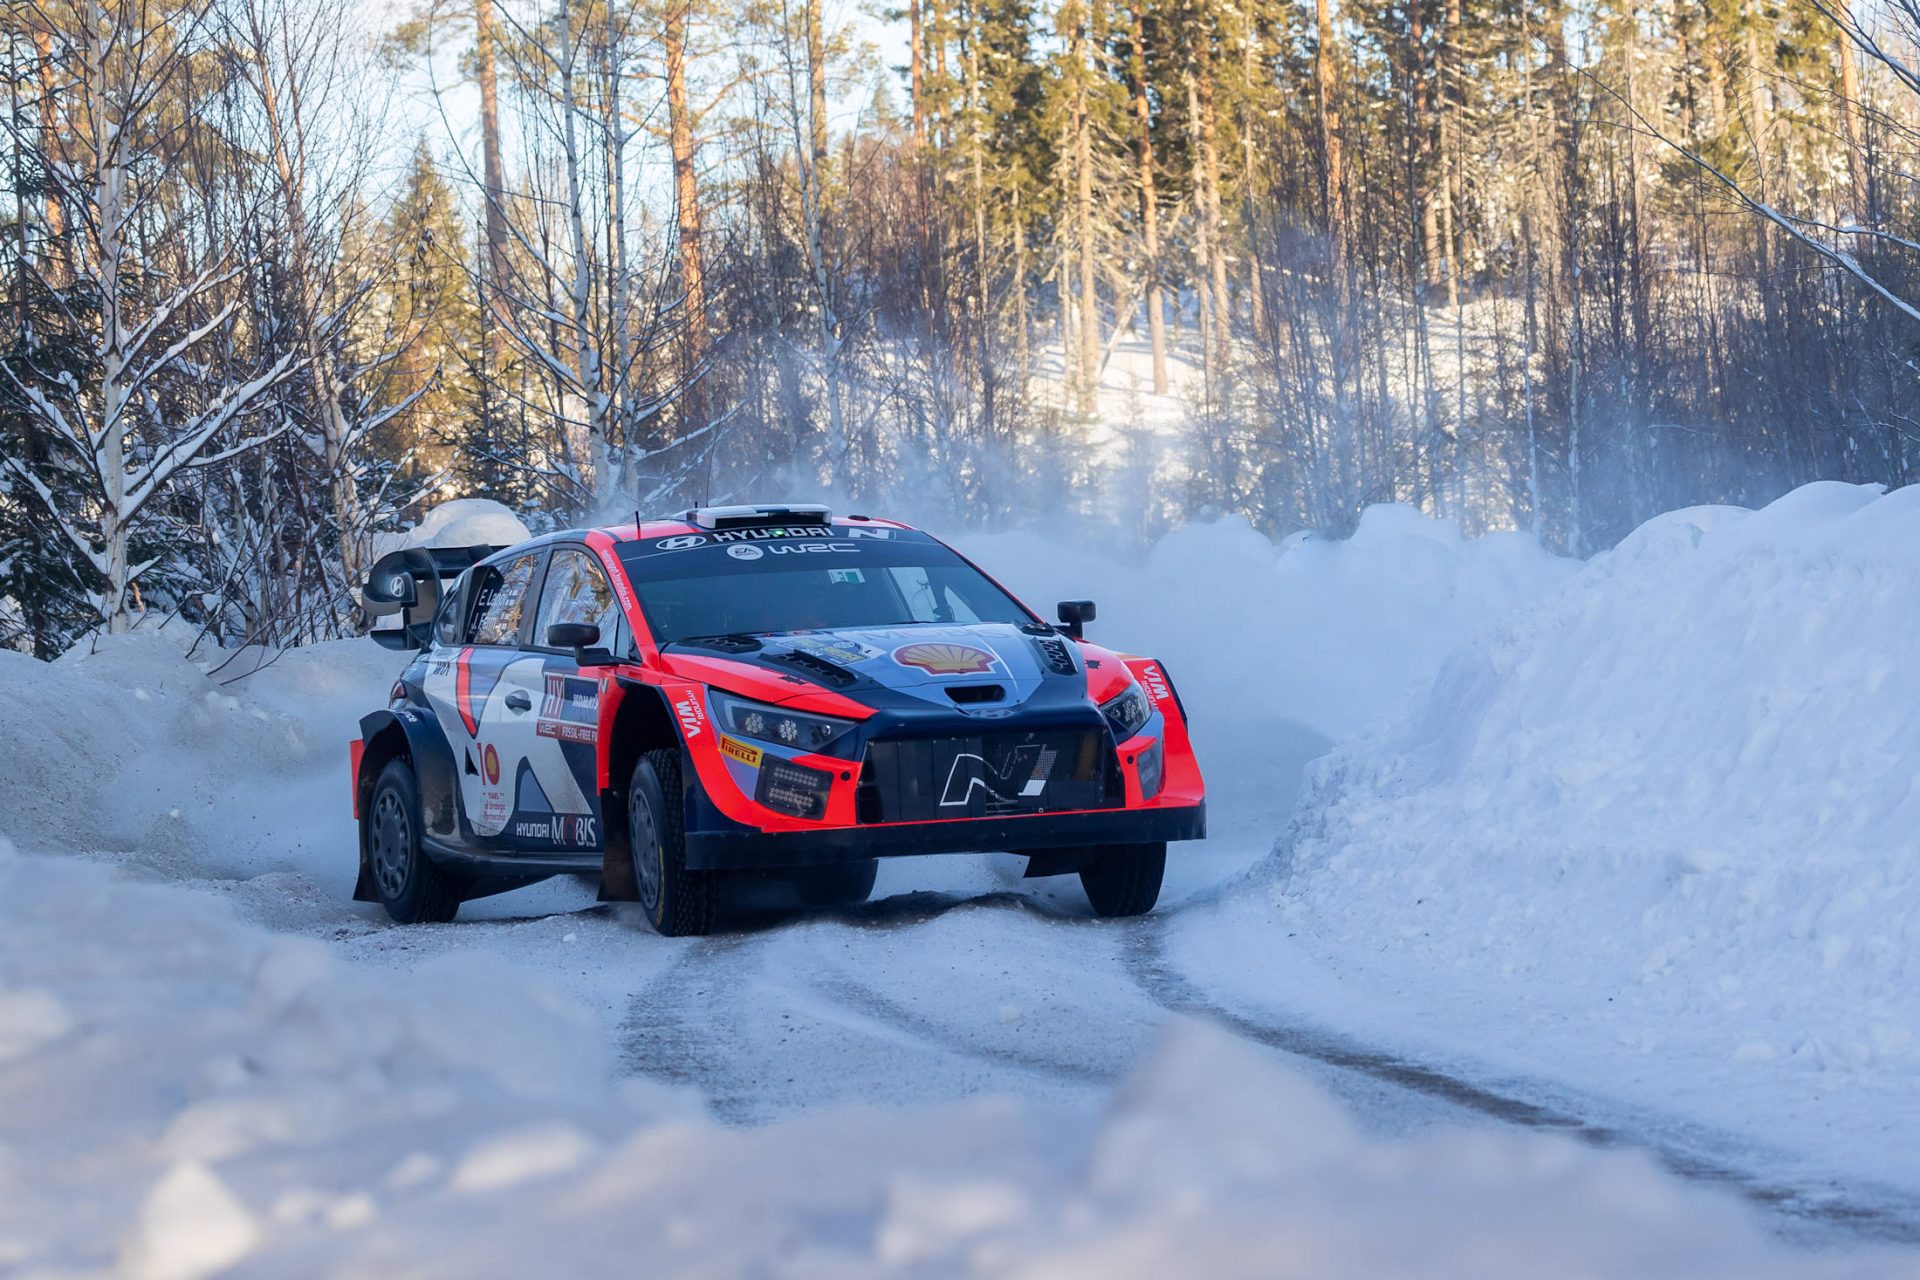 Rallying Royalty: Lappi and Solberg Reign Supreme in Sweden